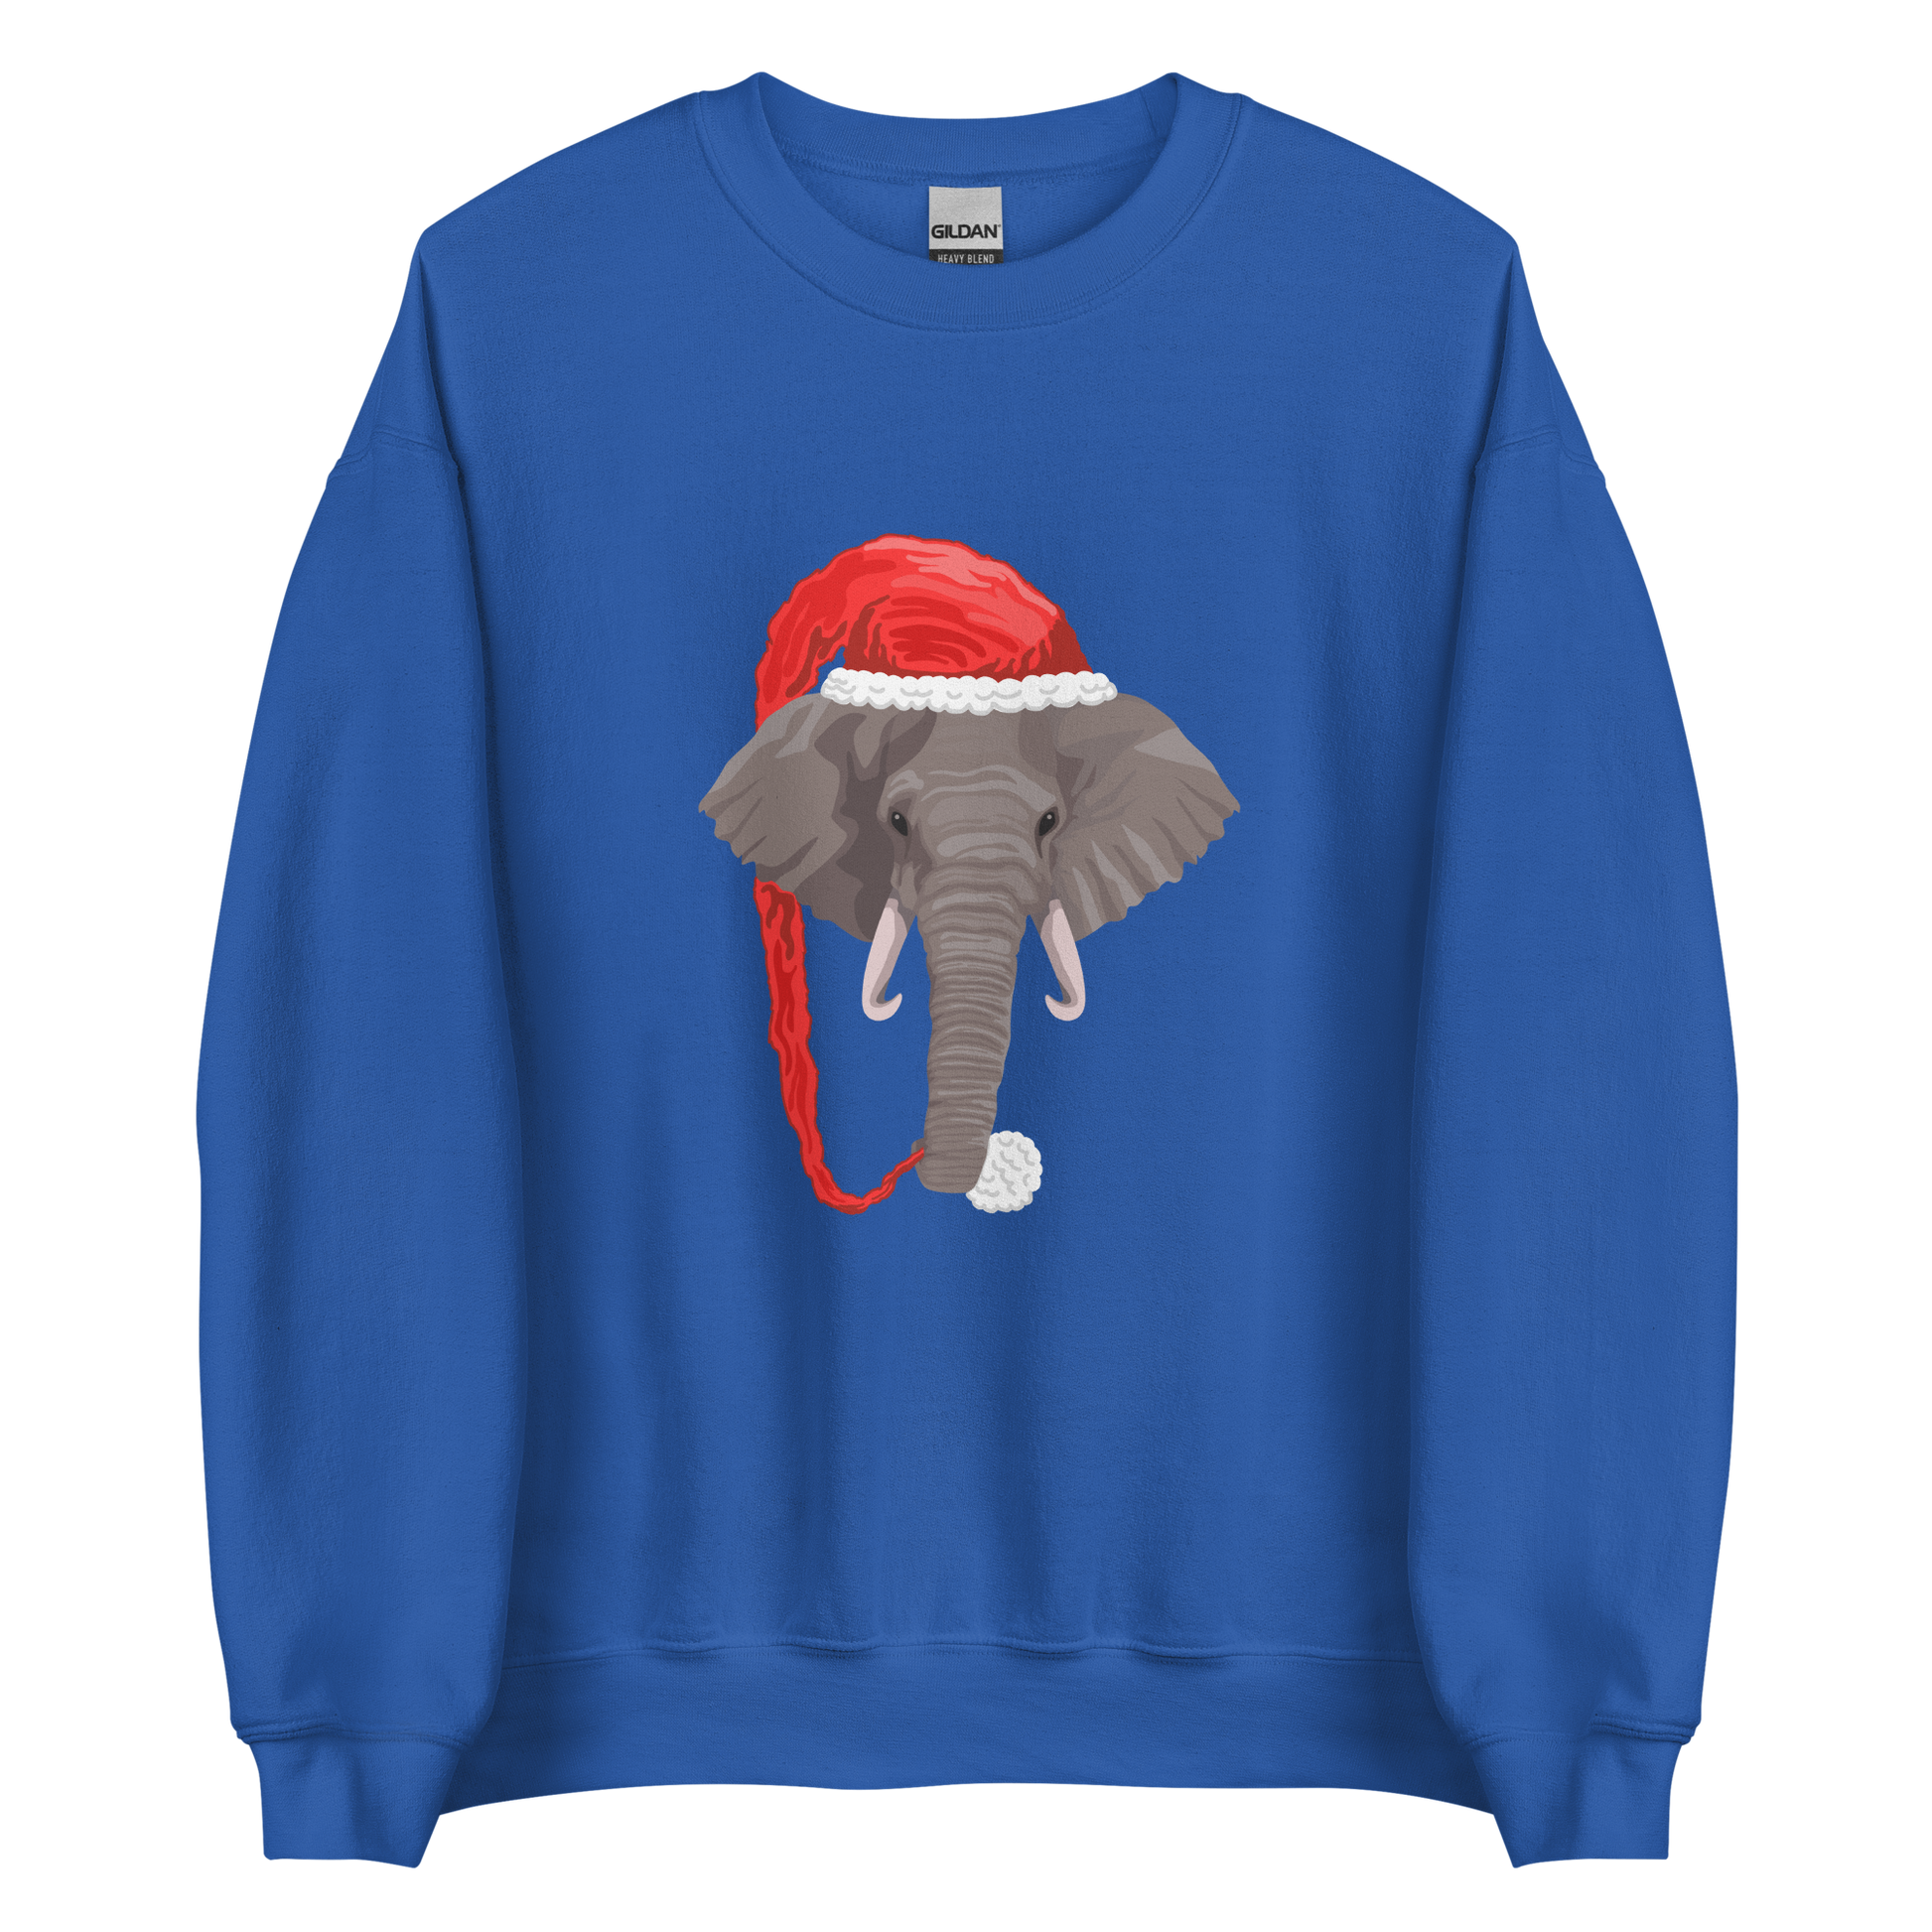 Royal Blue Christmas Elephant Sweatshirt featuring a delight Elephant Wearing an Elf Hat graphic on the chest - Funny Christmas Graphic Elephant Sweatshirts - Boozy Fox